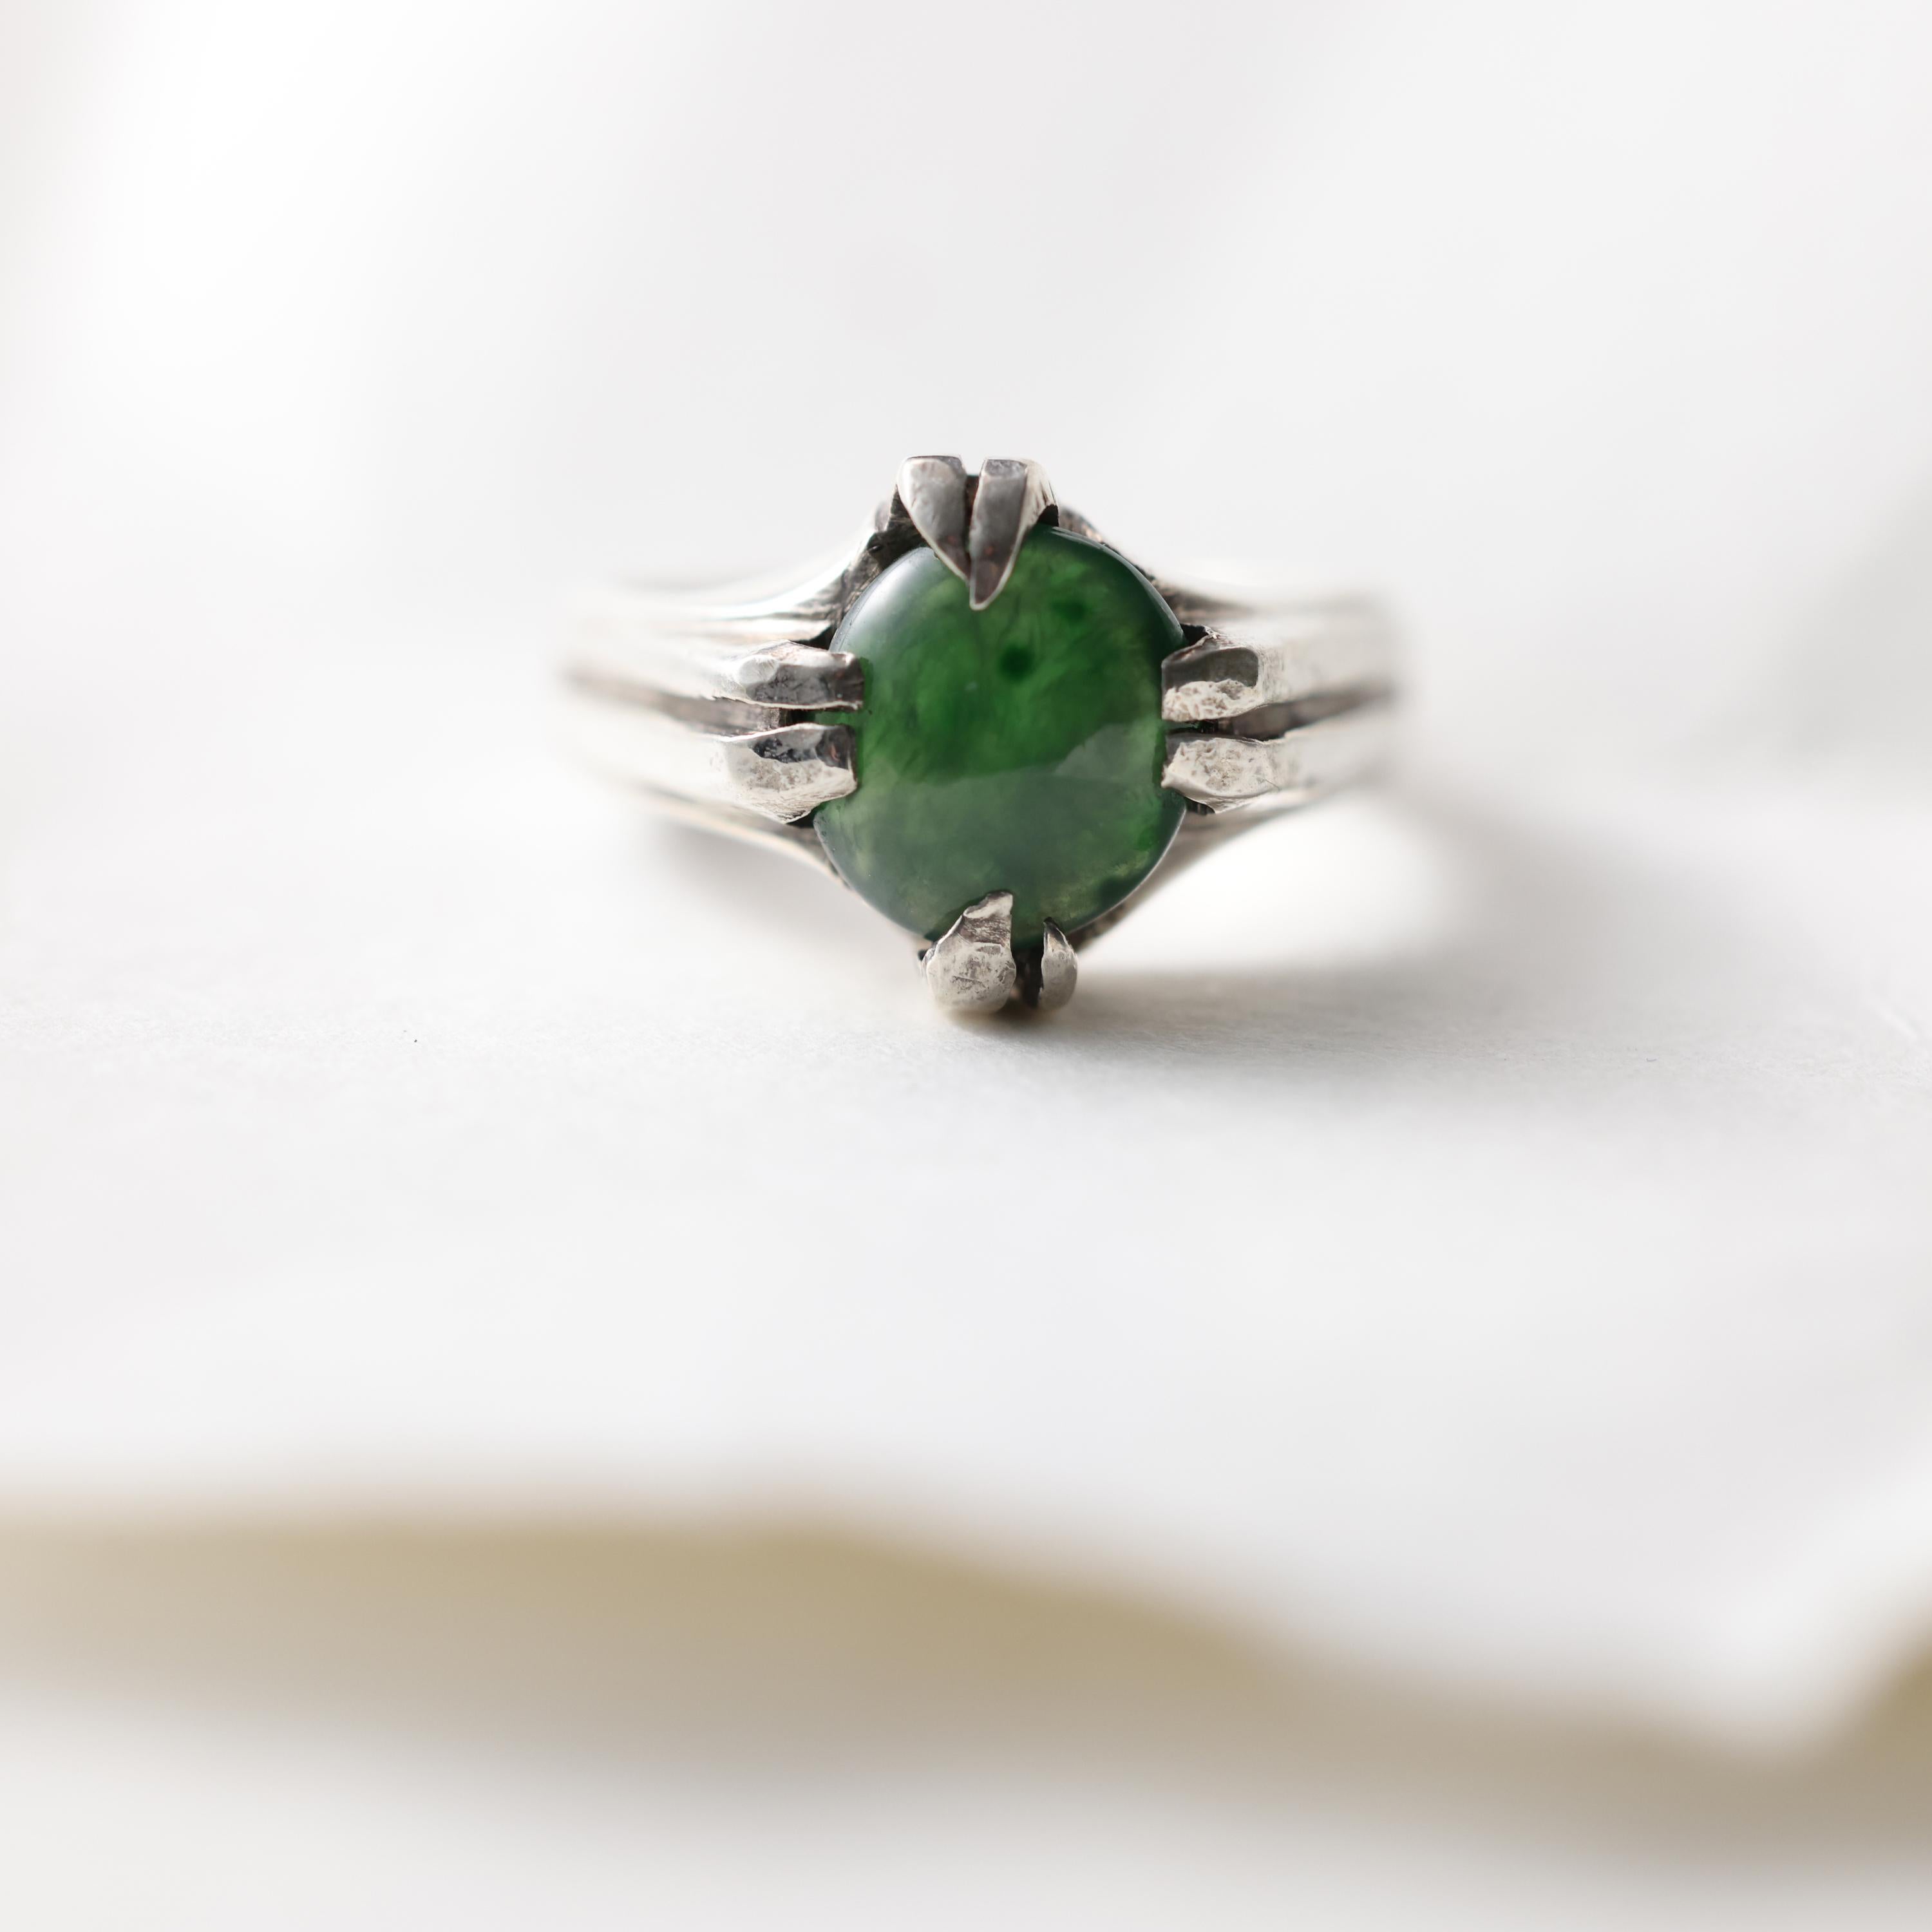 Omphacite Jade Ring in Silver, Certified Untreated Fei Cui 2